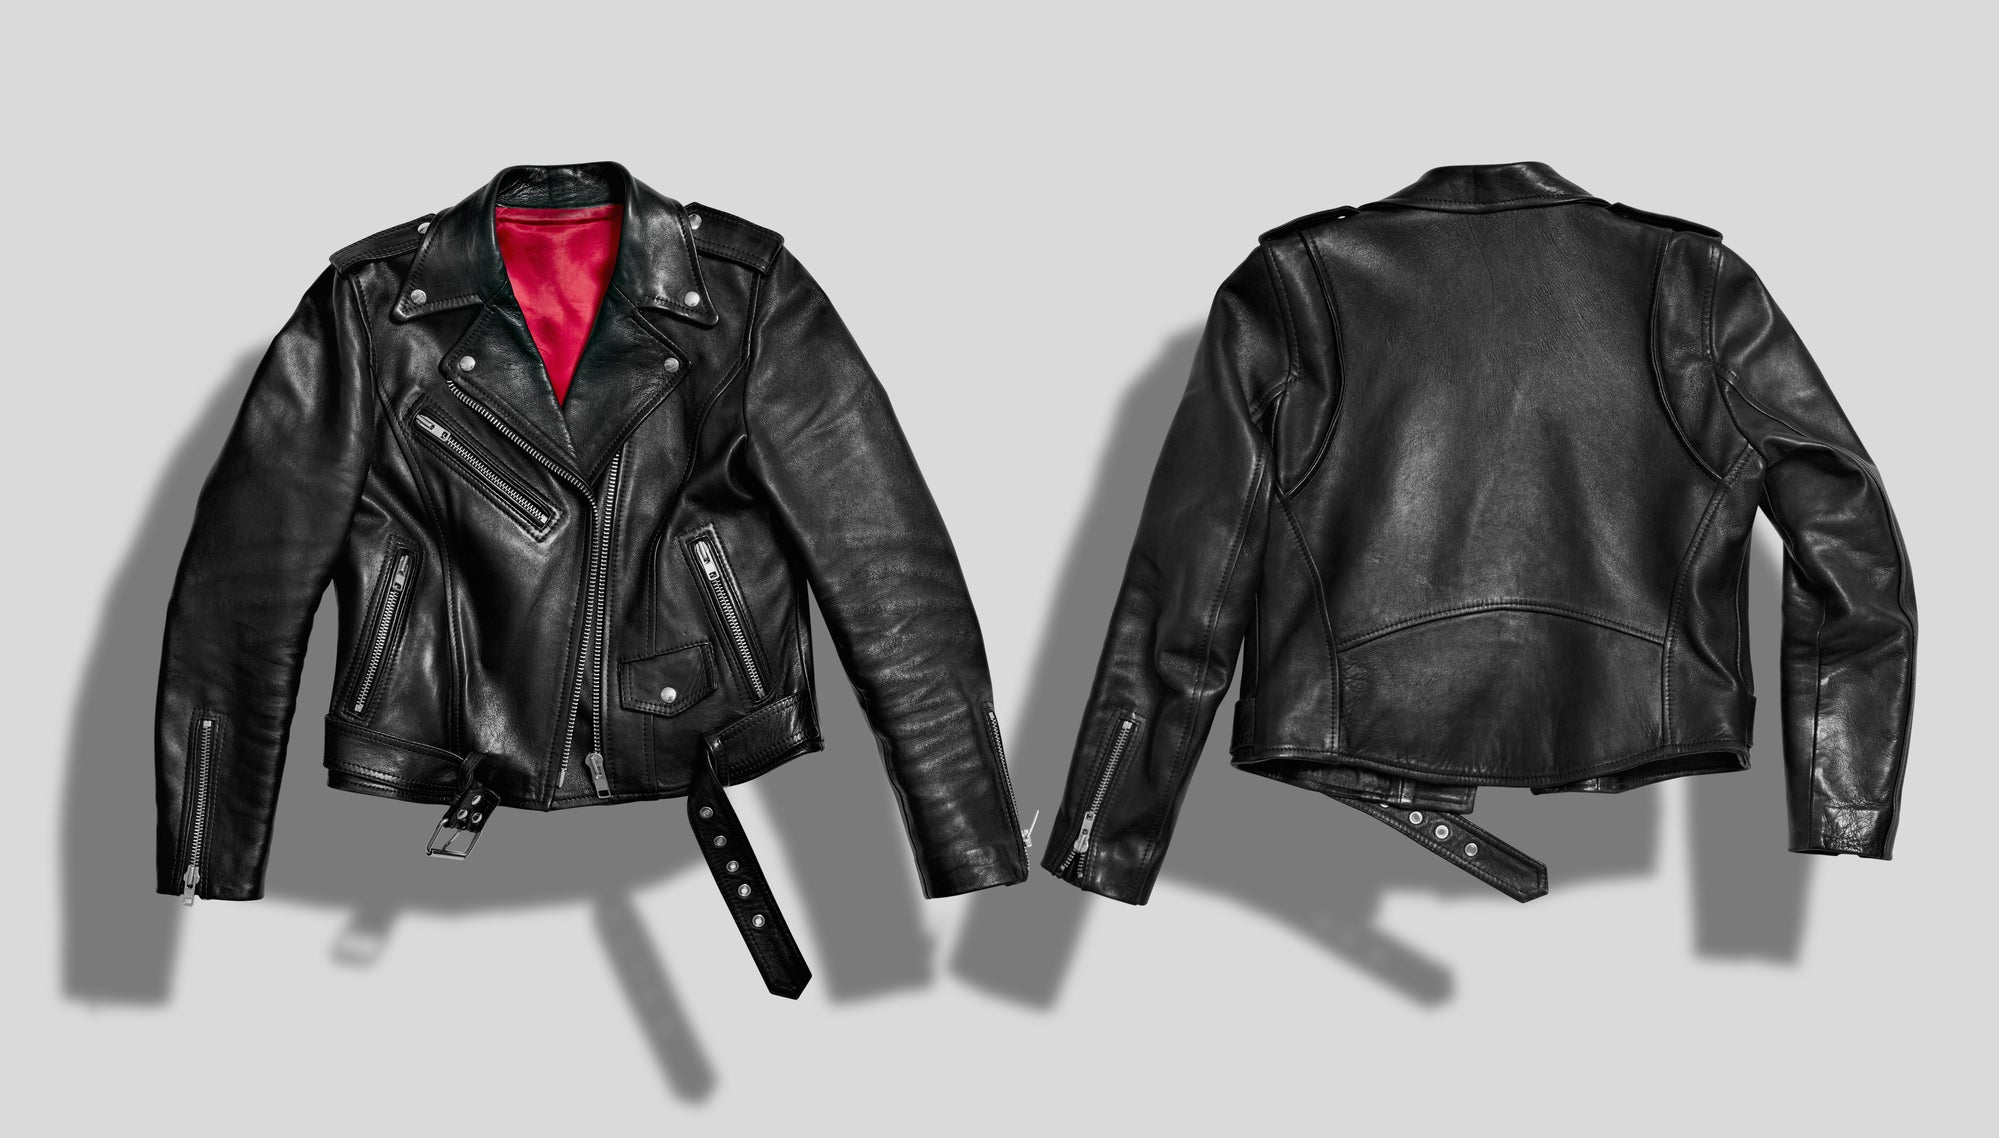 Best Leather Motorcycle Jacket (Review & Buying Guide) in 2022